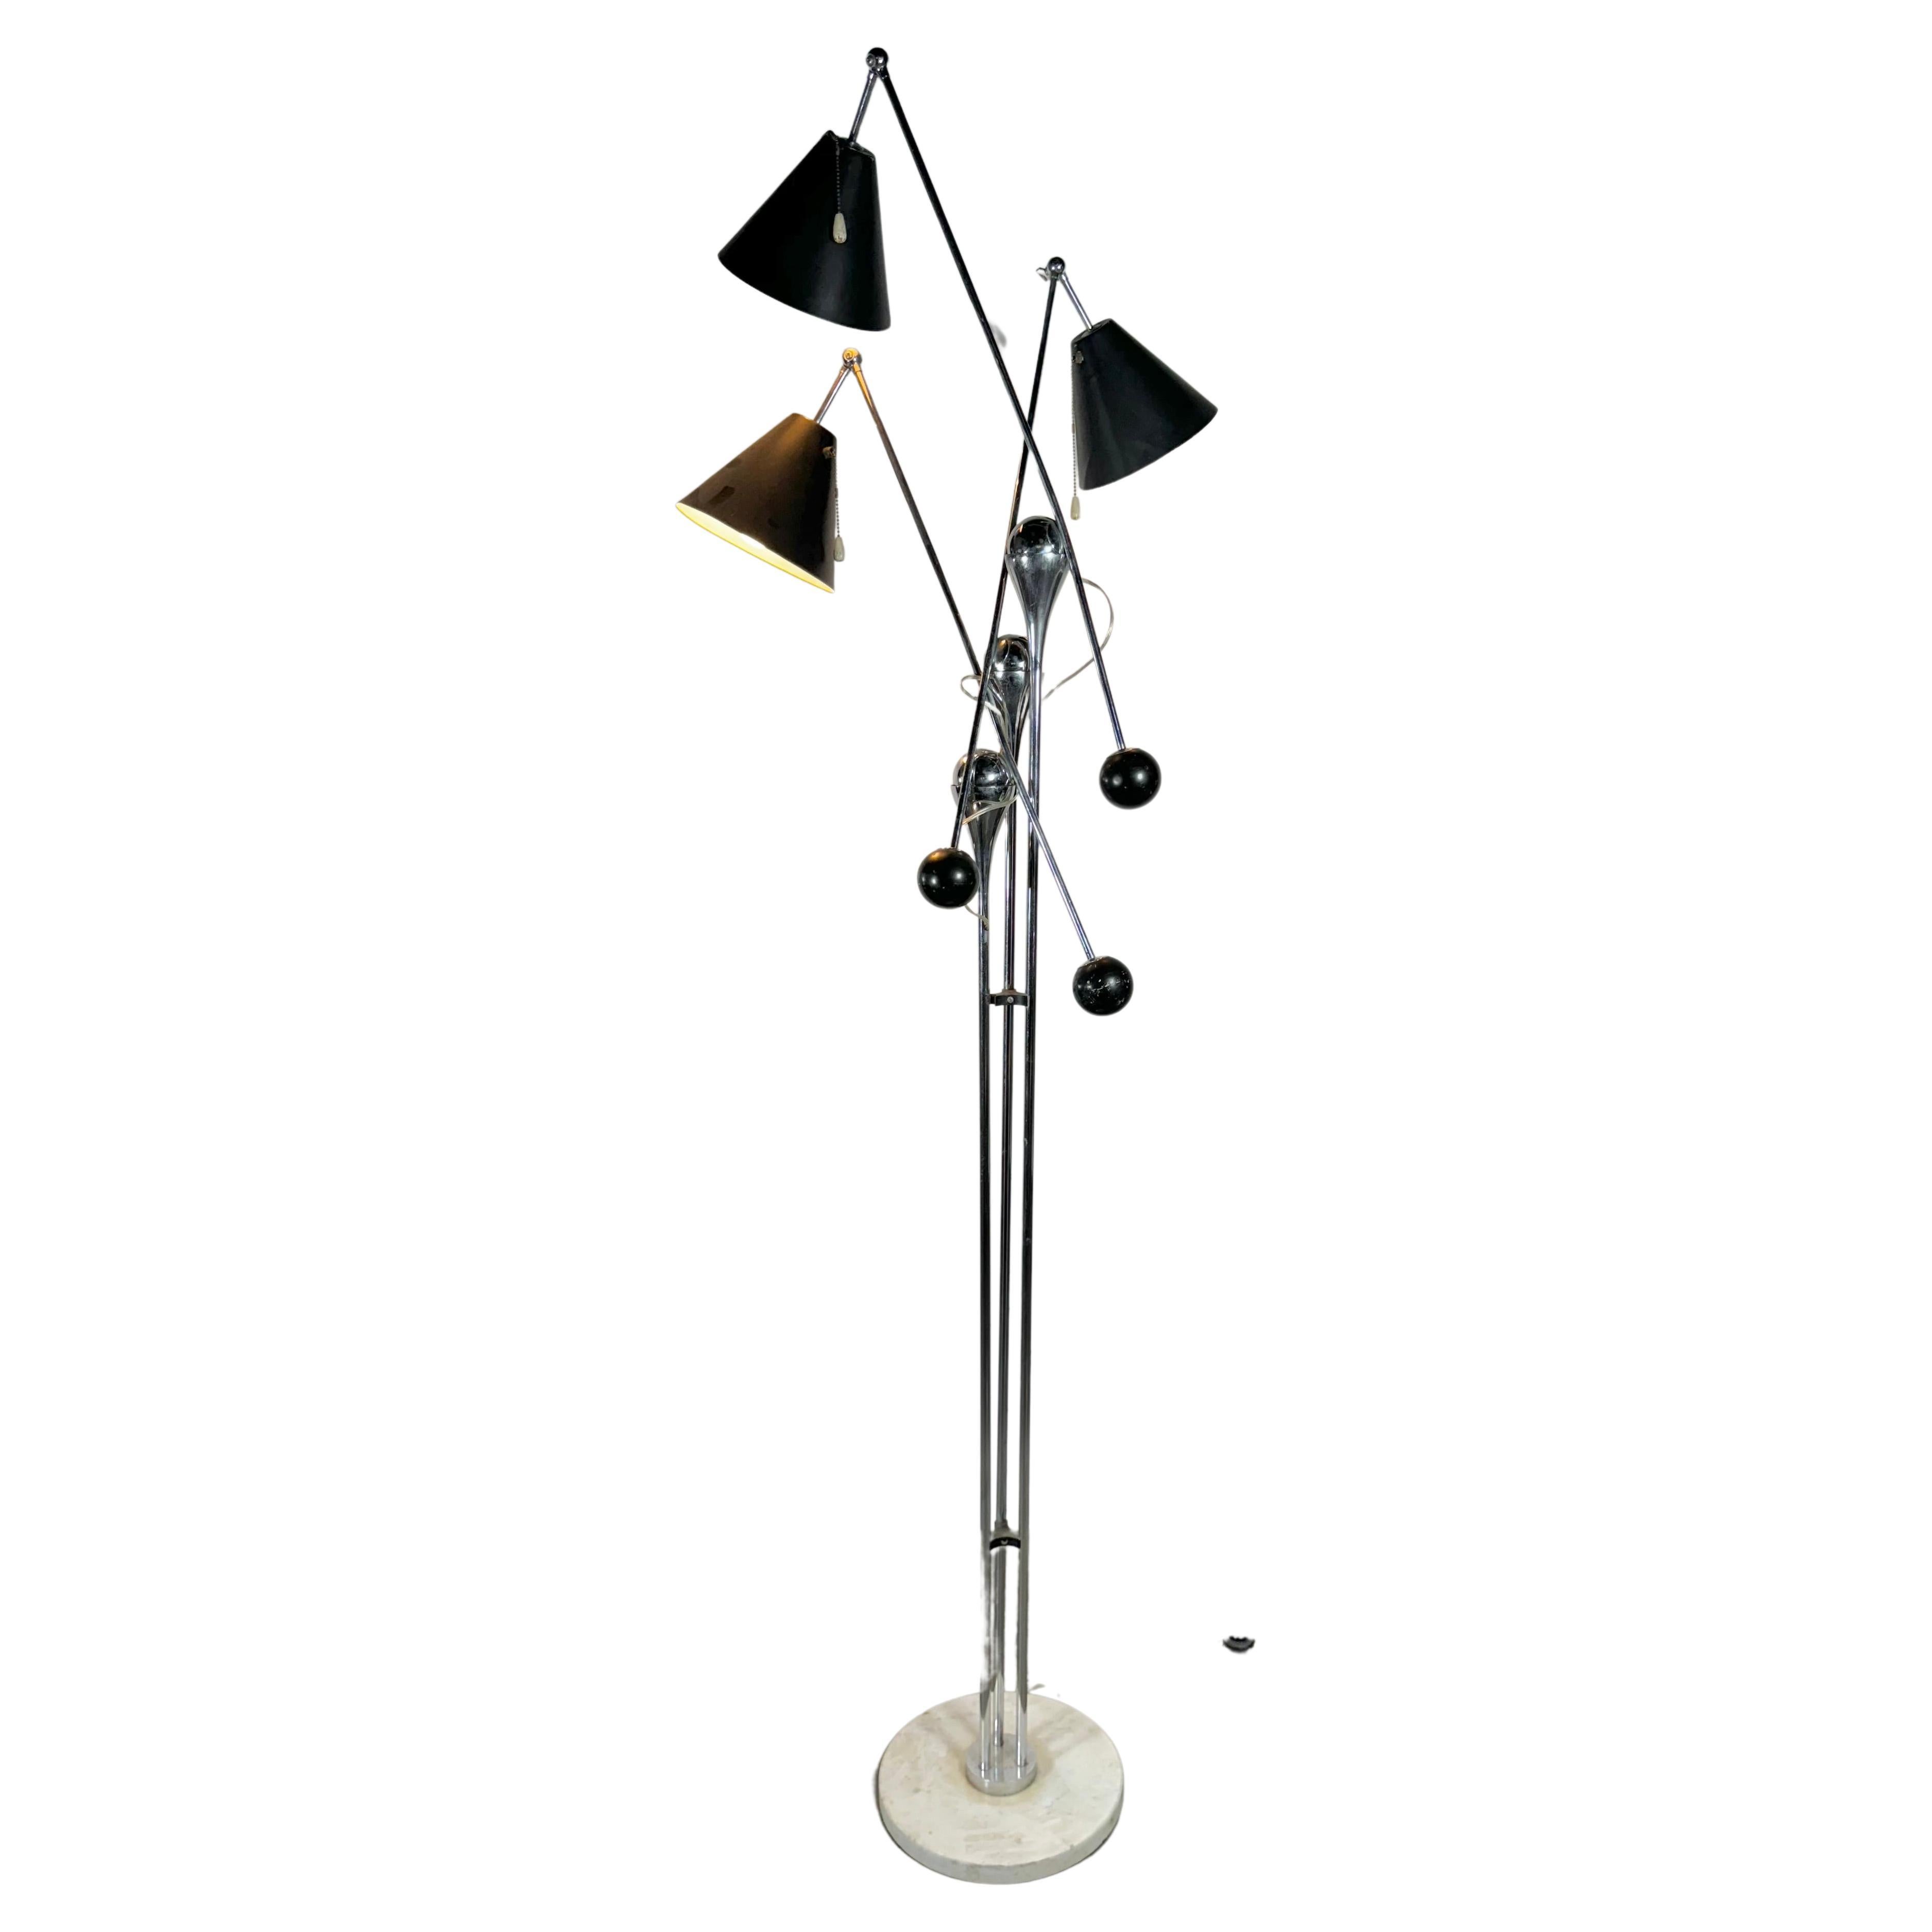 Extremely Rare Version !!!Arredoluce Triennale Floor Lamp model 14028 /  , Lampada da terra...This iconic floor lamp was designed by Angelo Lelli and manufactured by Arredoluce, Italy / 1960's.. Large Chrome balls sit in trumpet shape holders and